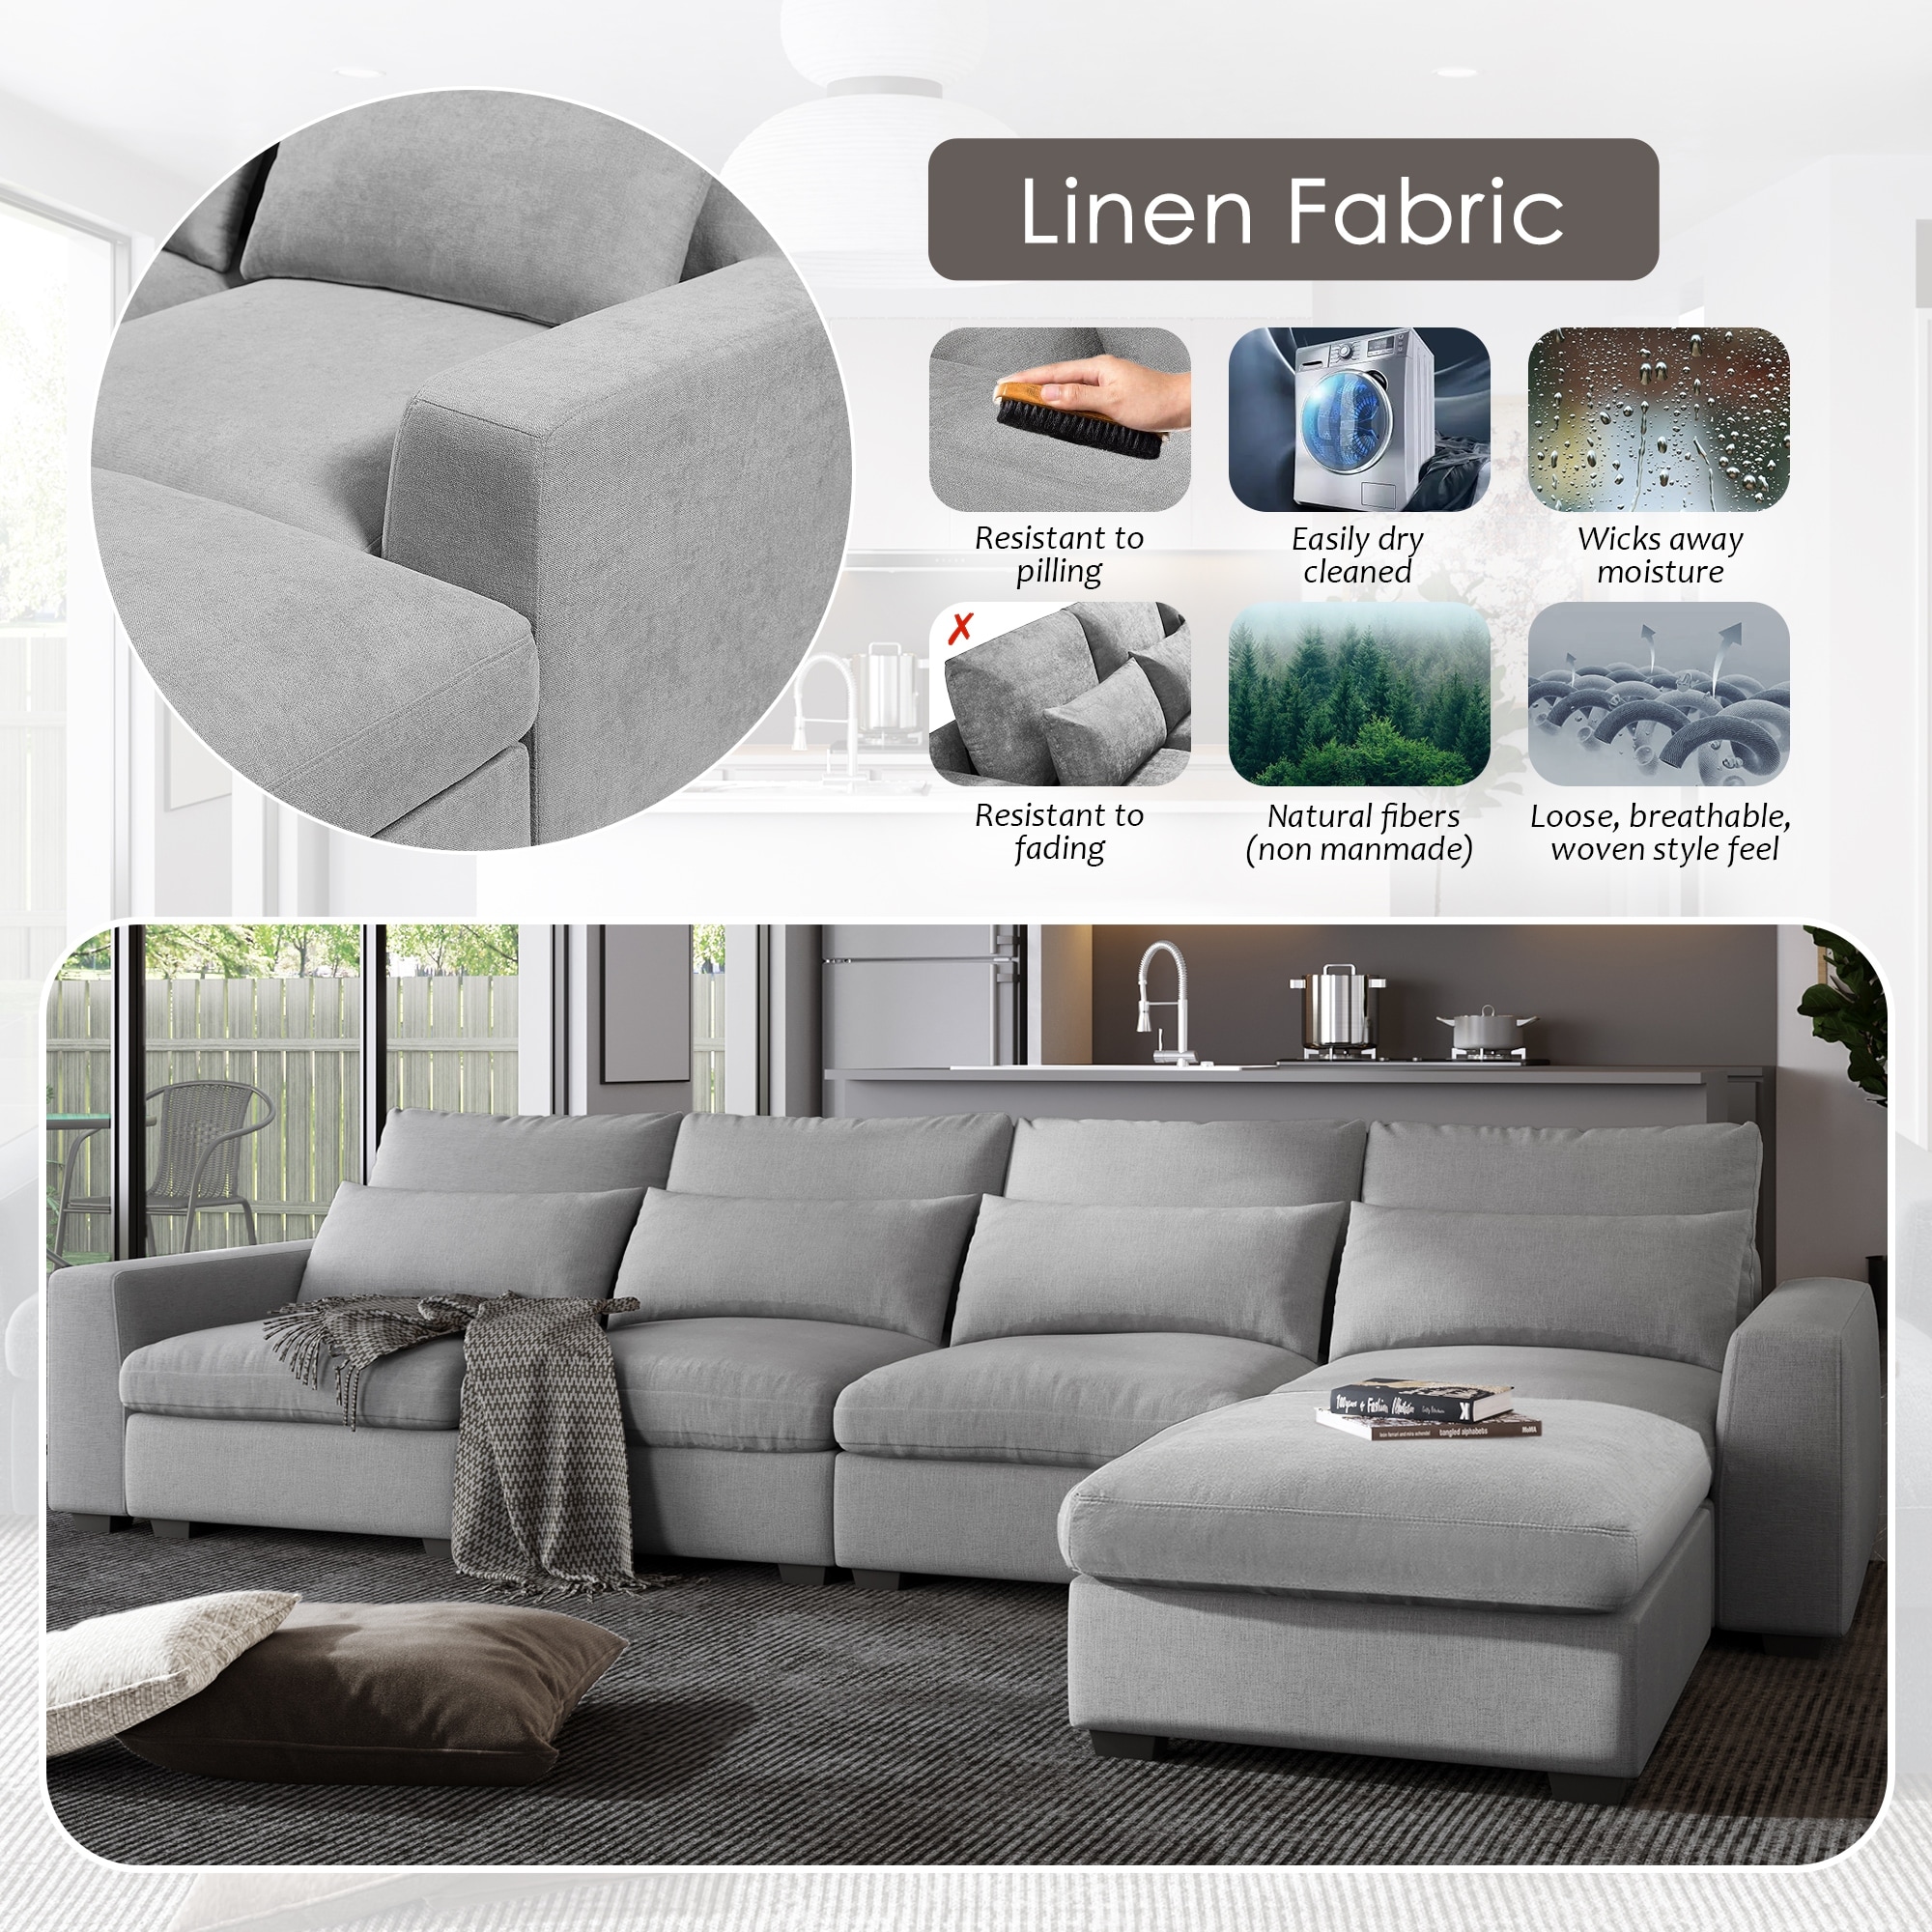 https://ak1.ostkcdn.com/images/products/is/images/direct/88e072456f51bb4e510b7d158be38a00e6f7ac6d/L-shape-Feather-Filled-Sectional-Sofa-Set-Convertible-Couch-Set-with-Movable-Ottomans-and-Lumbar-Pillows-for-Living-Room.jpg